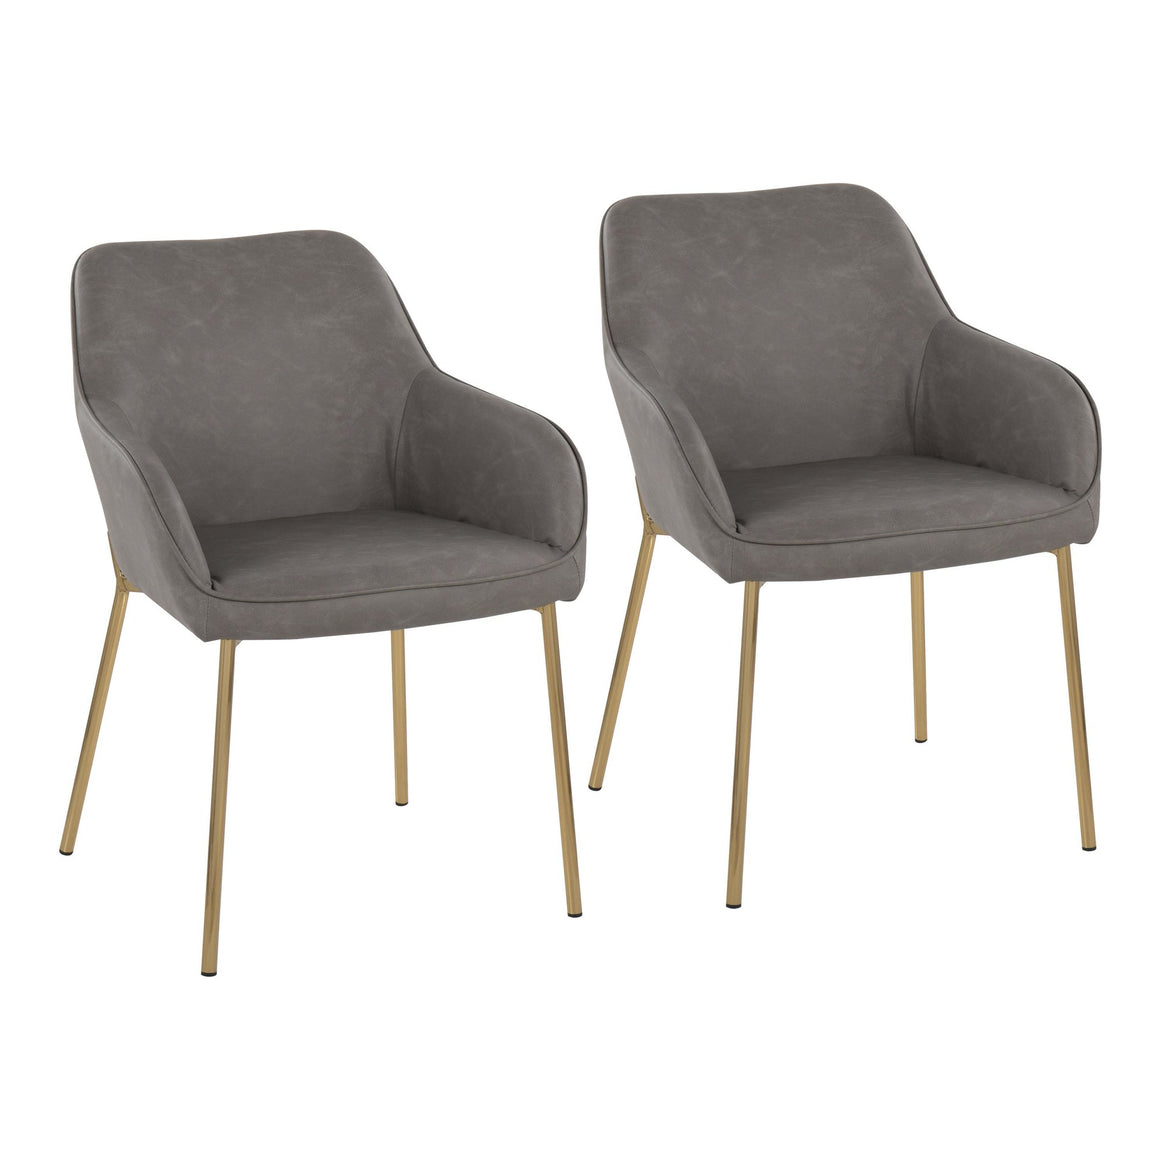 Daniella Contemporary Dining Chair in Gold Steel and Grey Faux Leather by LumiSource - Set of 2